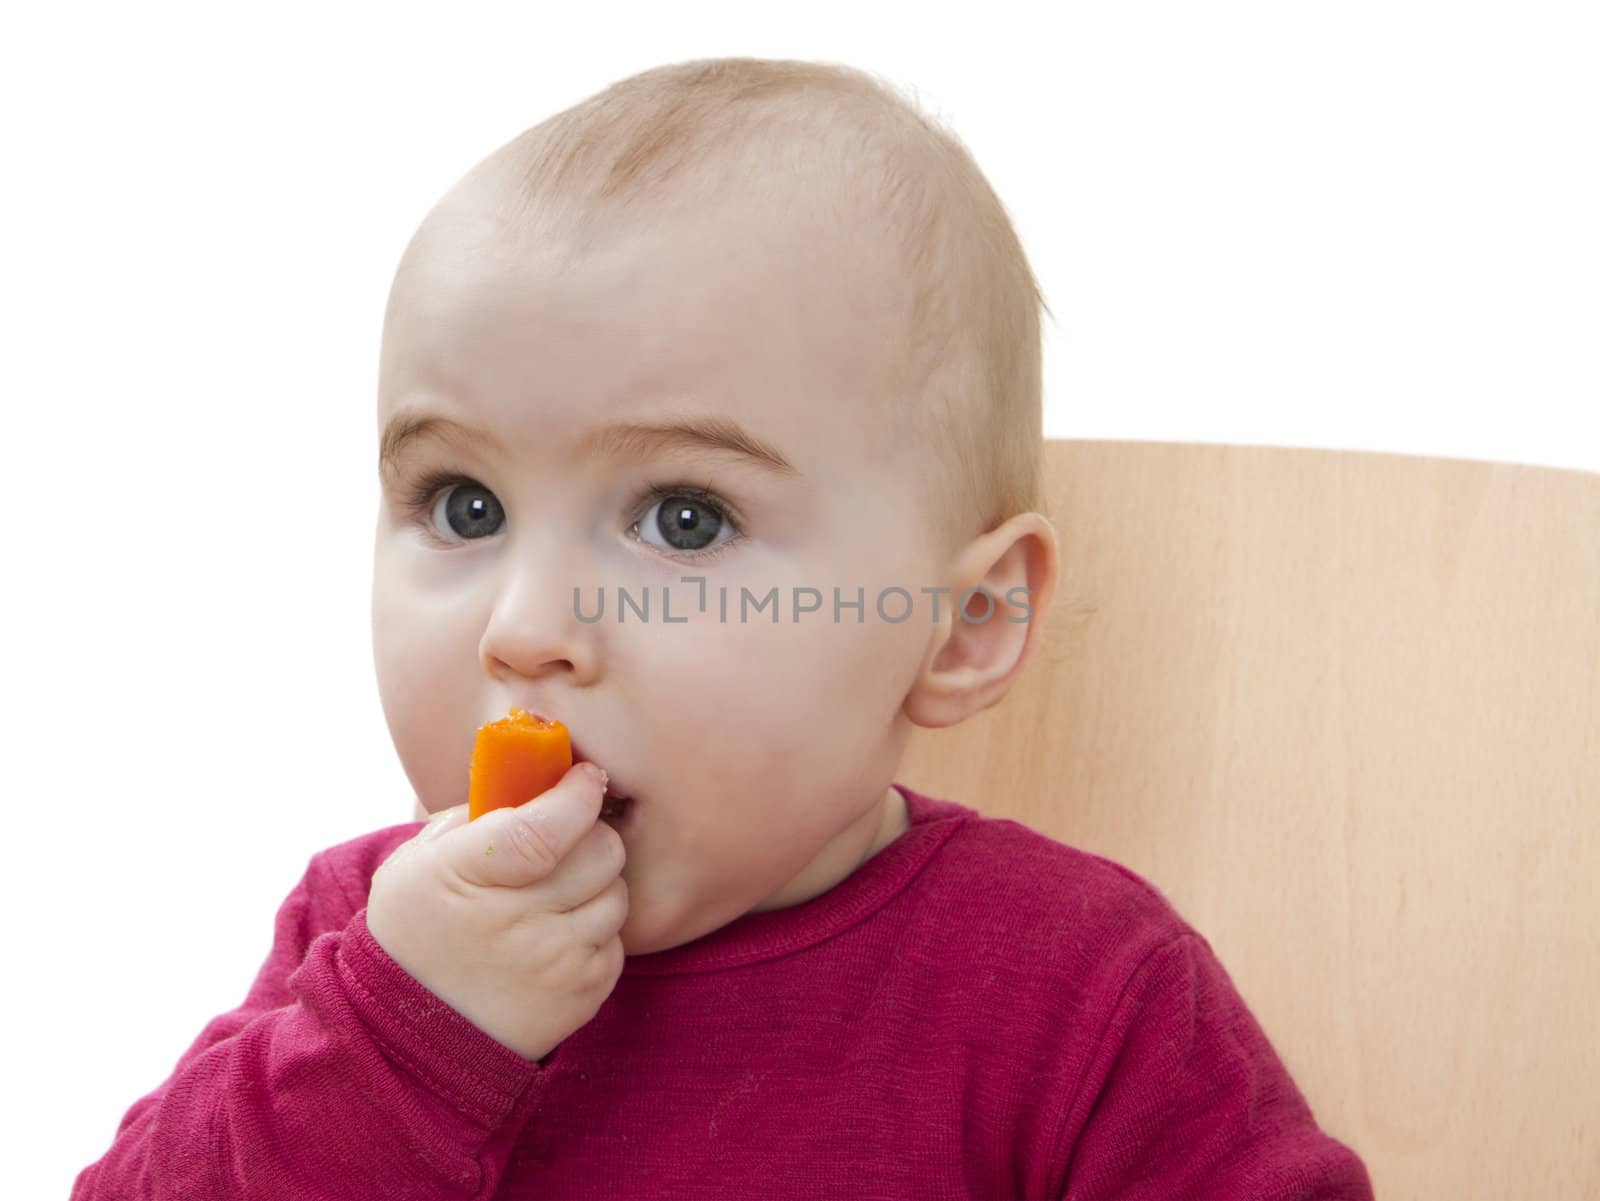 child in red shirt eating. white background